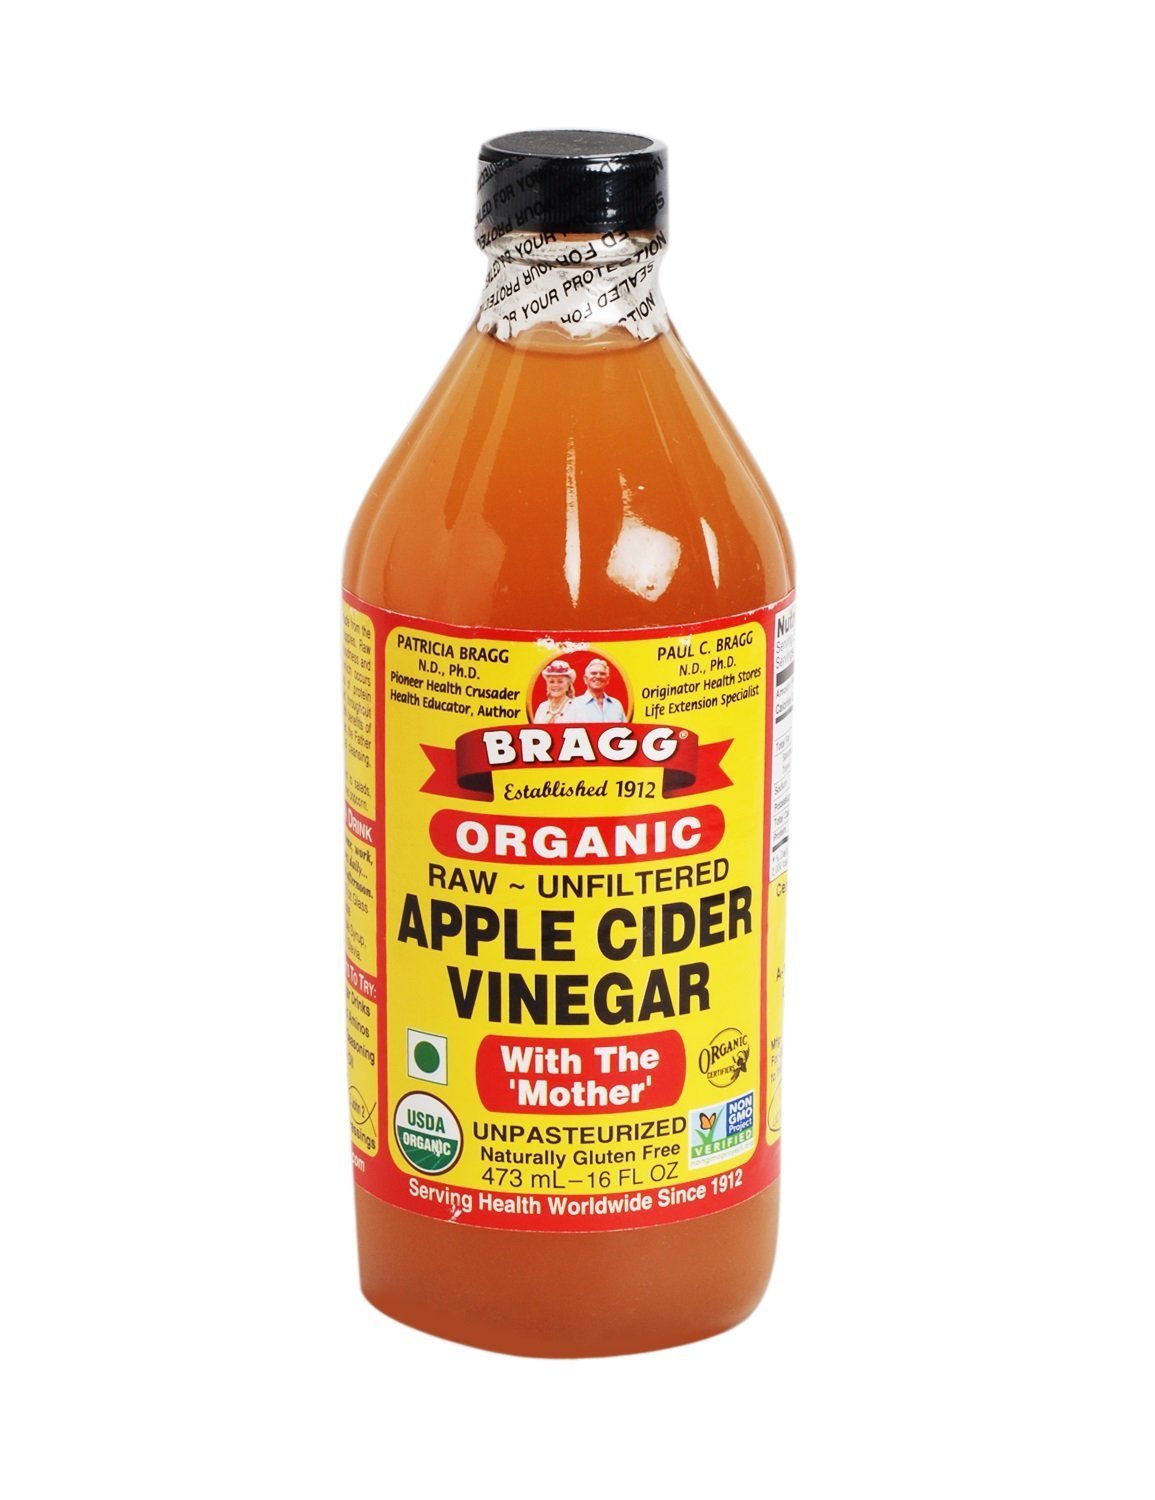 Why I donât Recommend Apple Cider Vinegar for Eczema ...